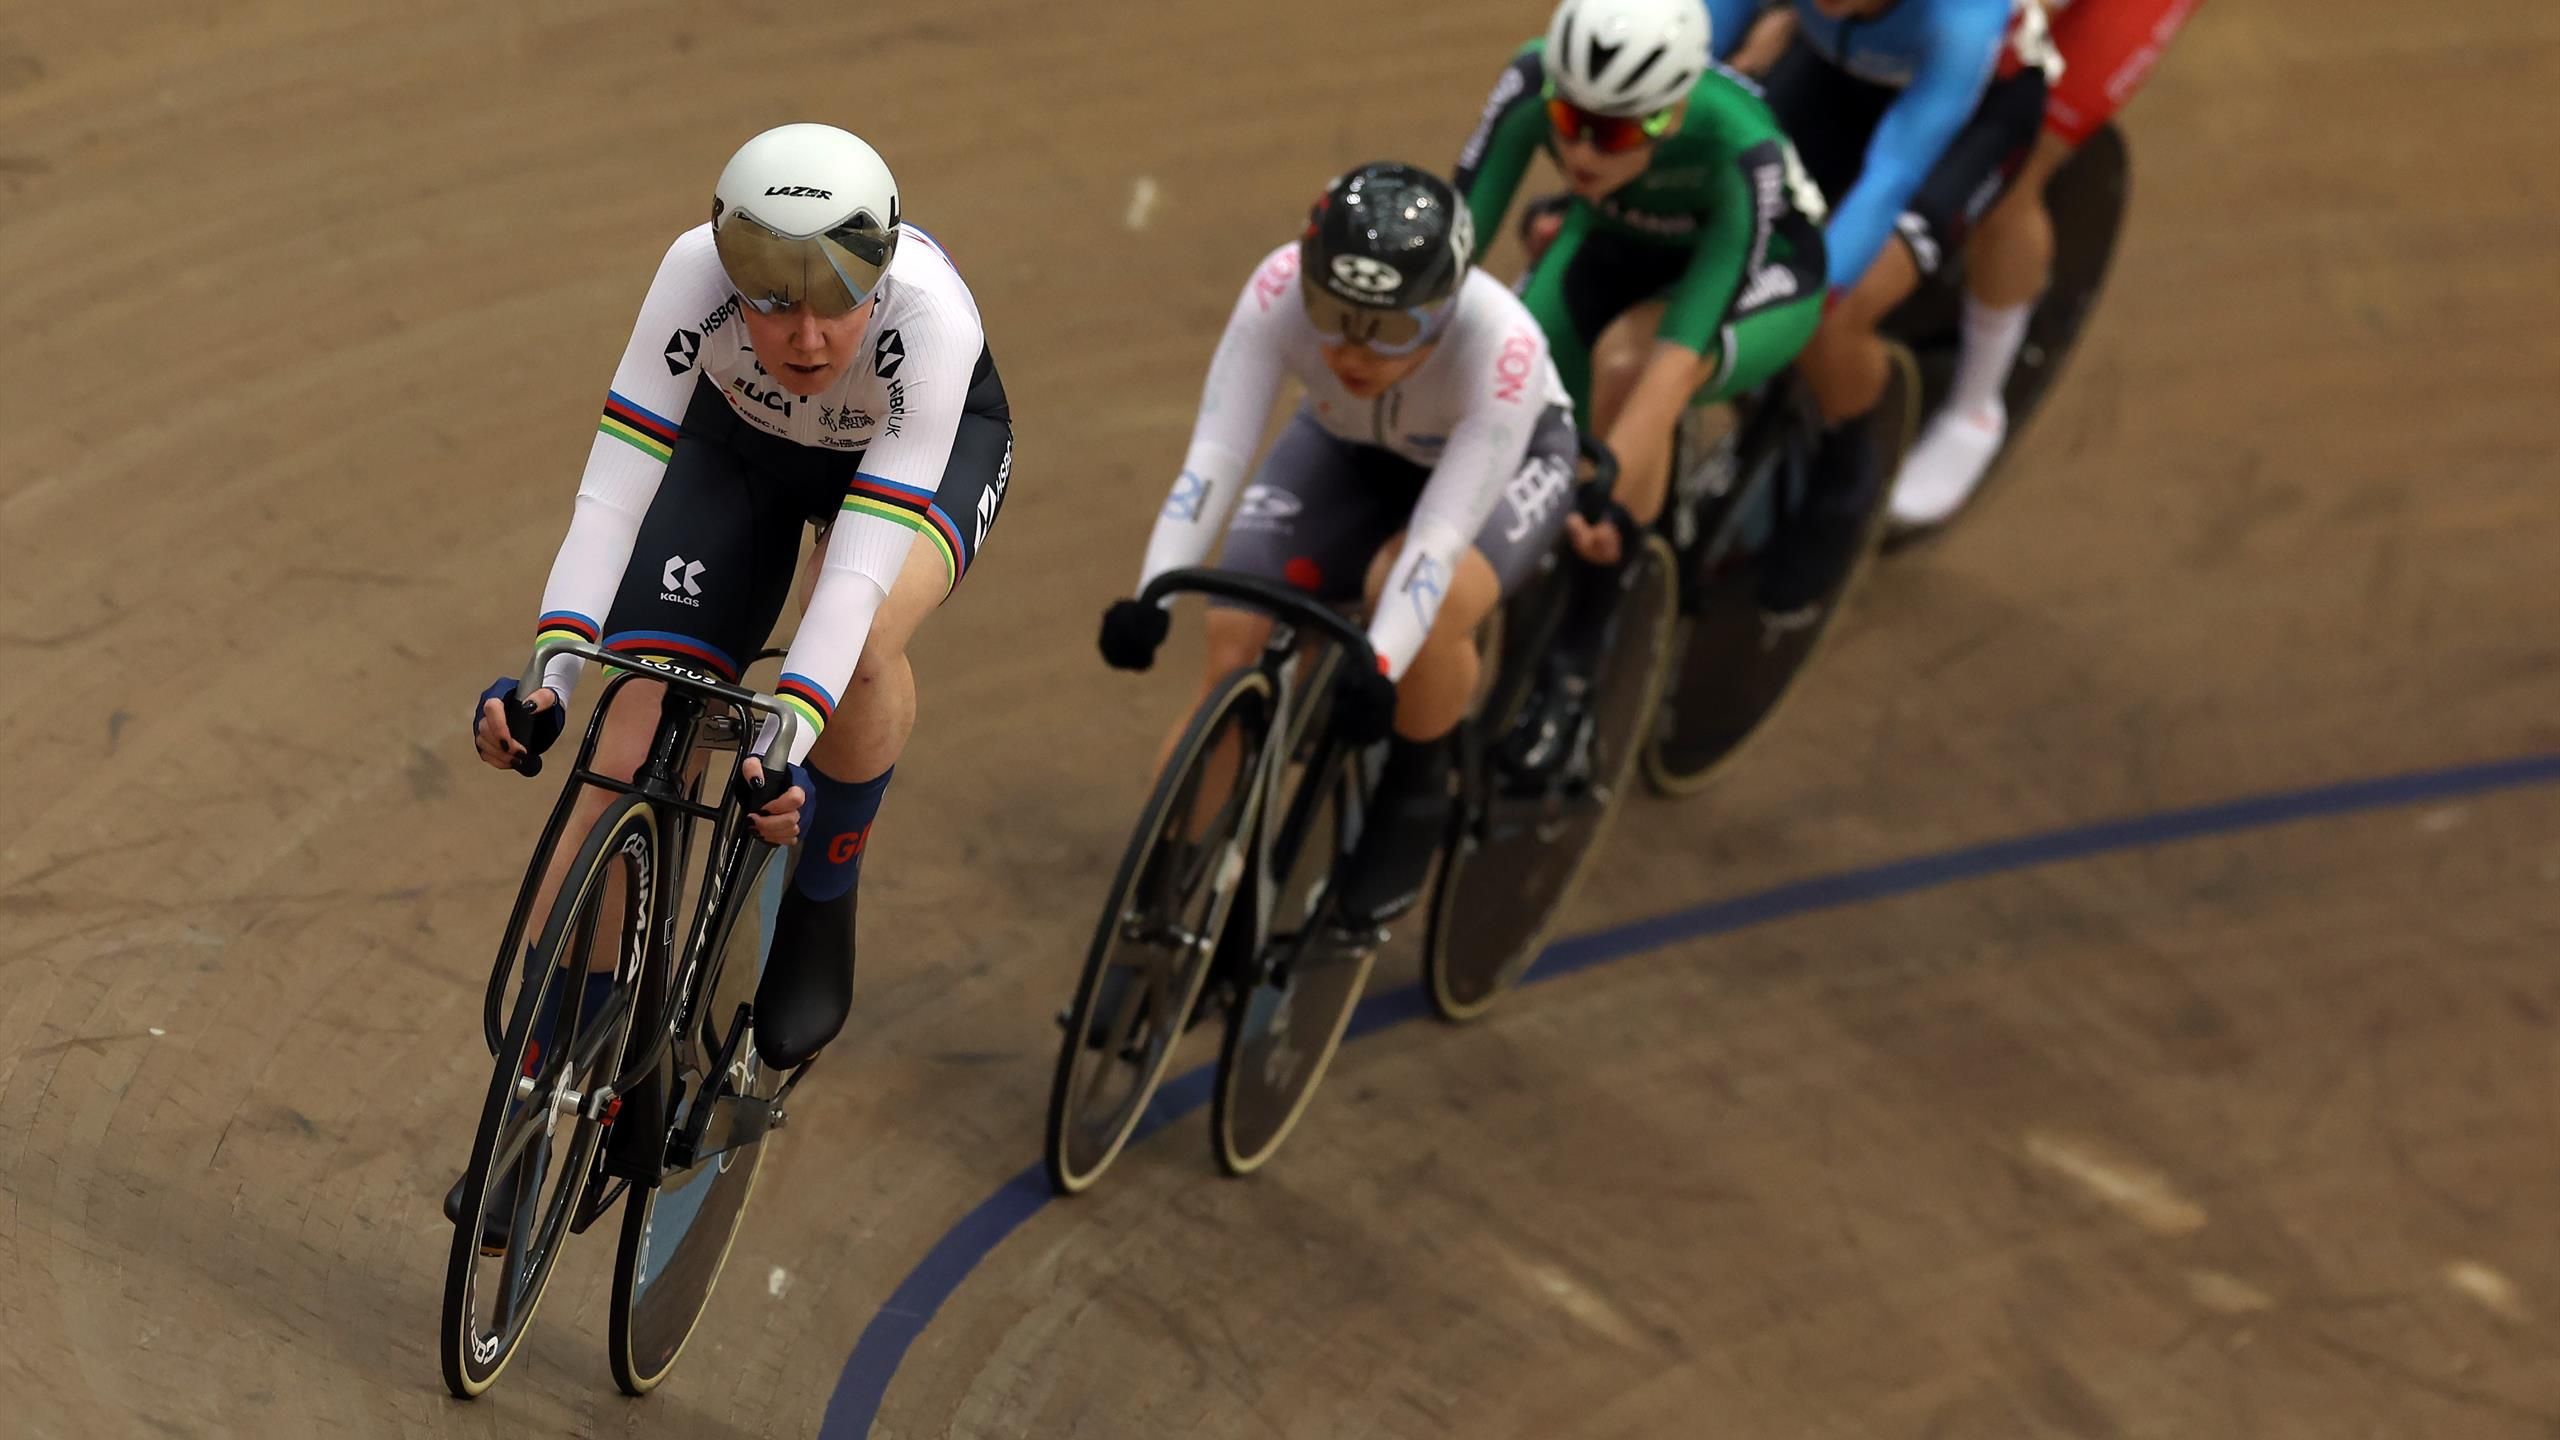 UCI Track Cycling World Championships Dates, events, riders to watch and more